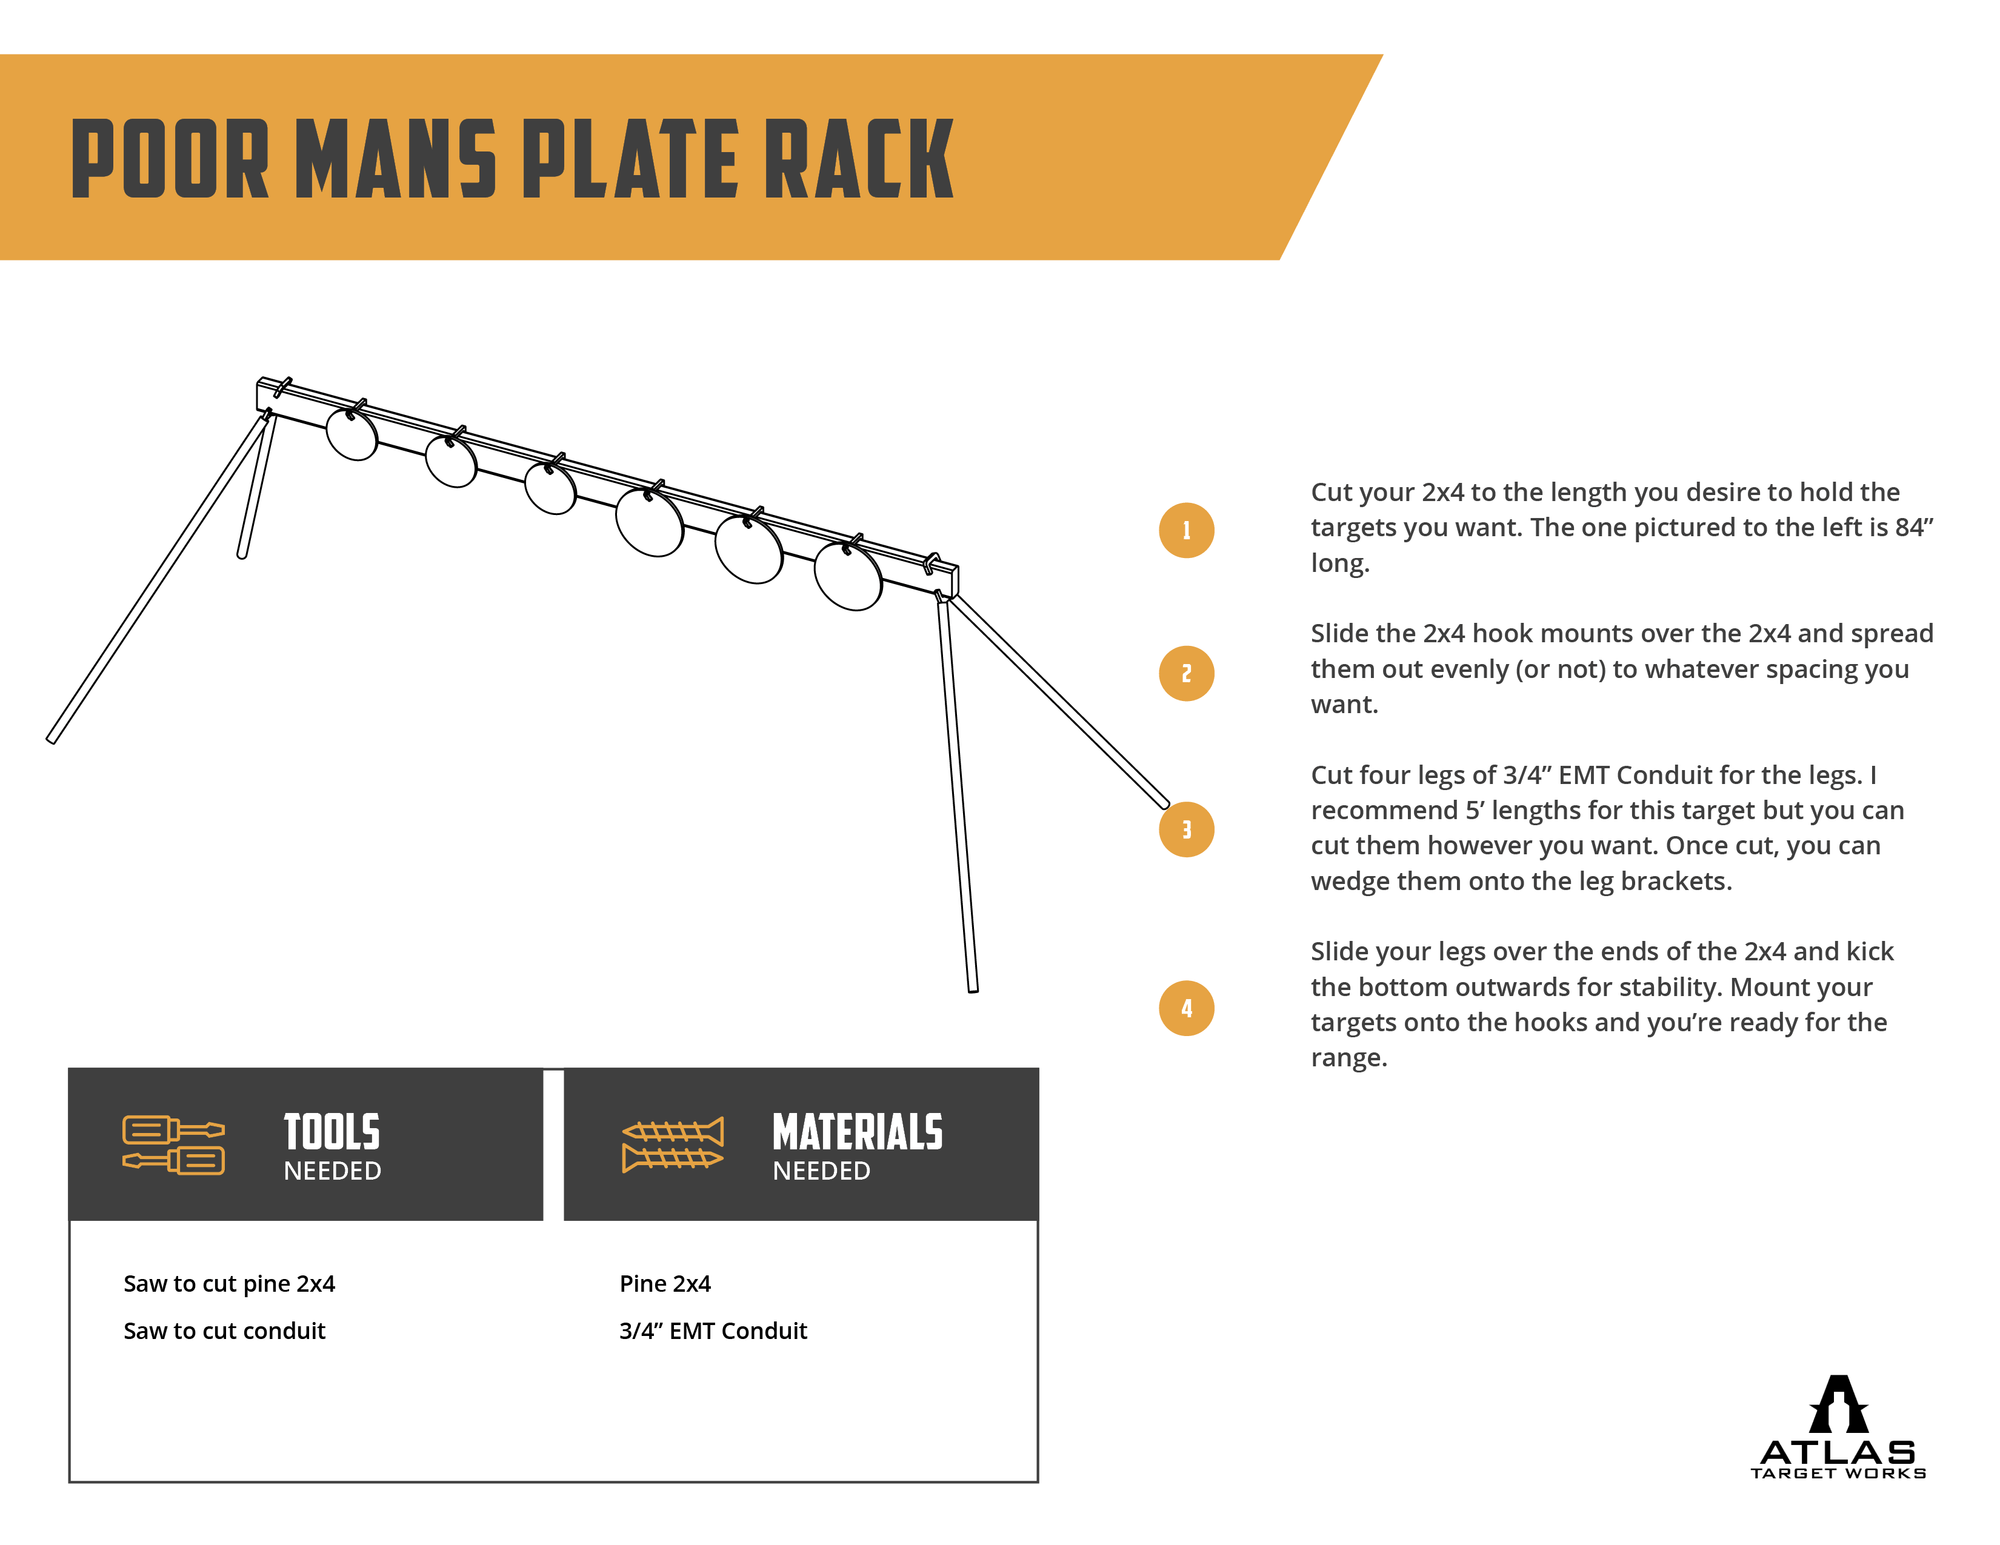 poor mans plate rack assembly instructions